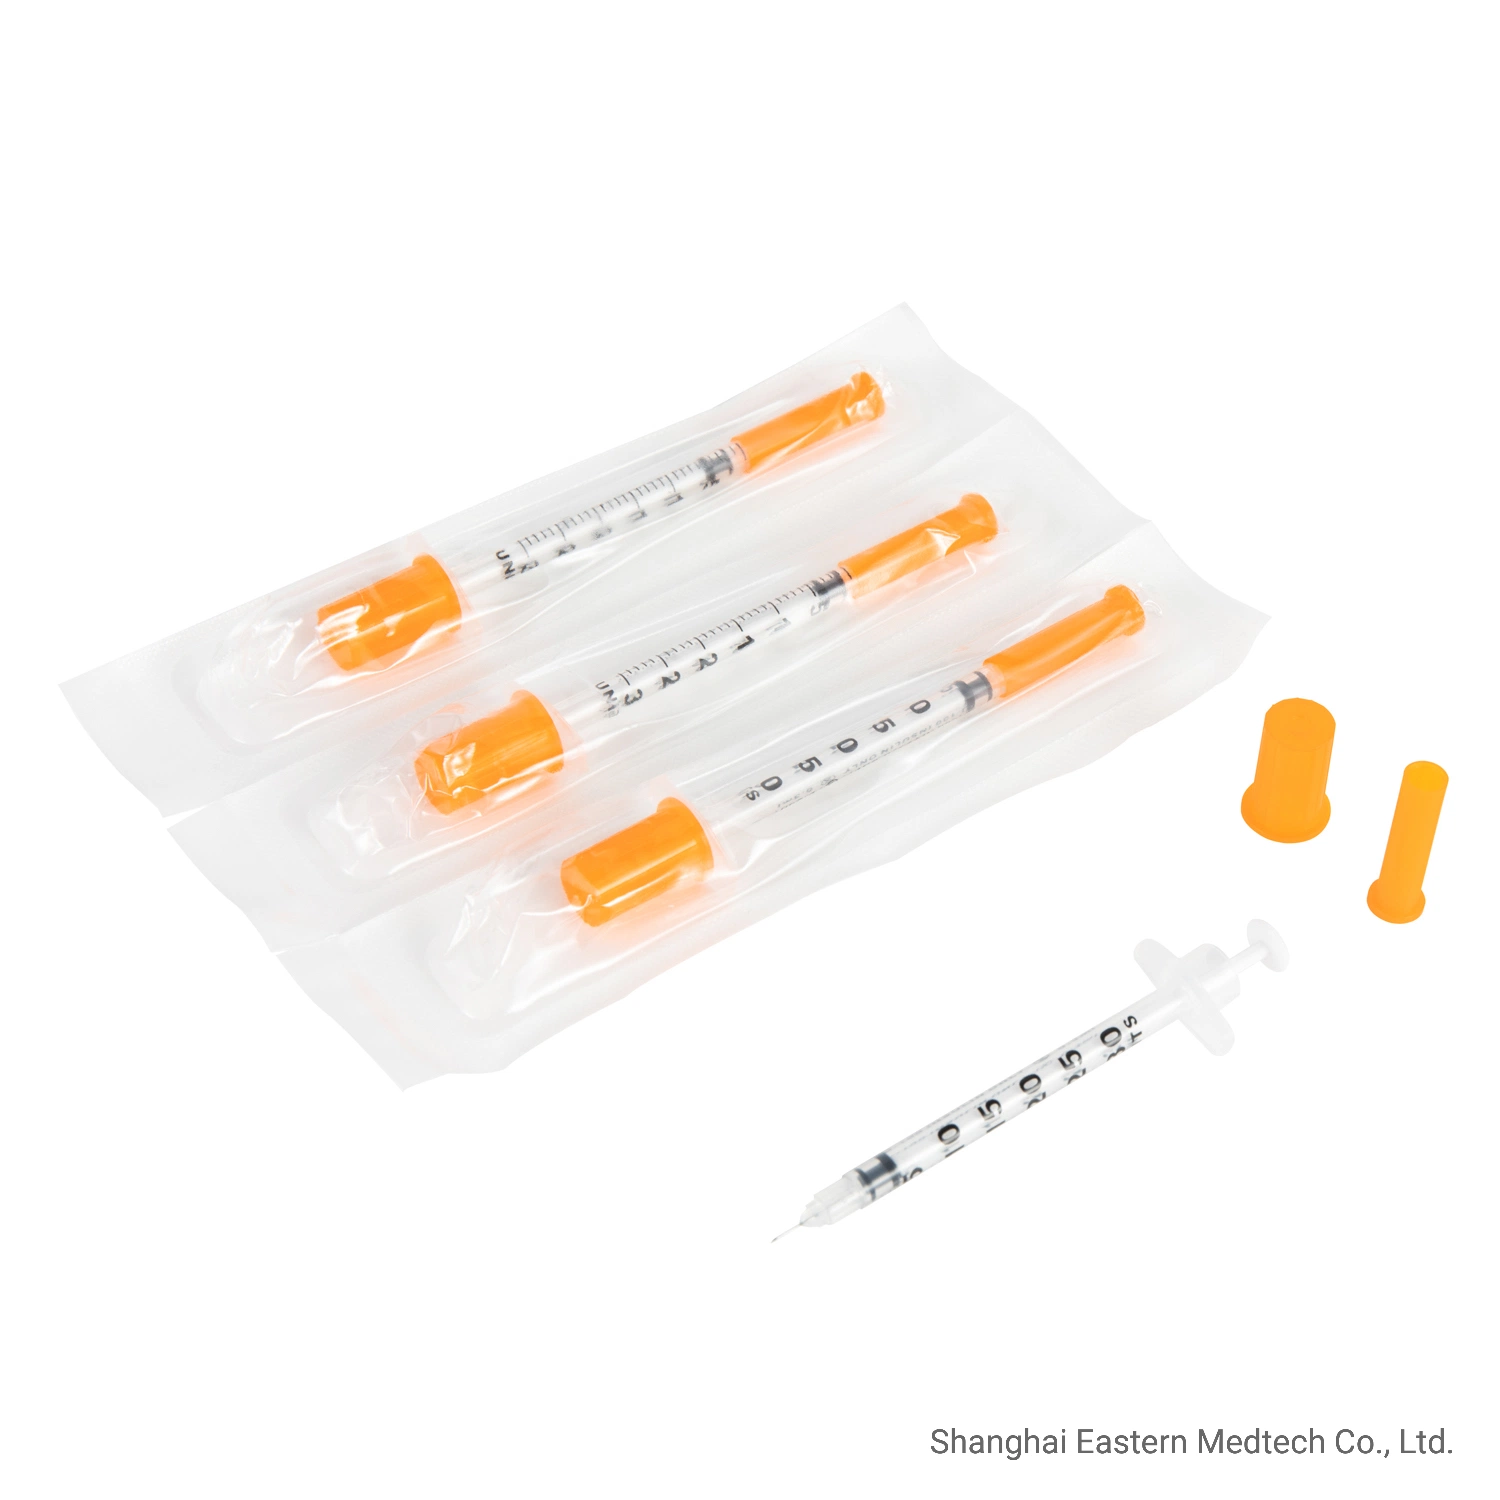 10PCS Per Bag Insulin Injection Disposable Medical Sterile Colored Insulin Syringe with Orange Cap and Needle